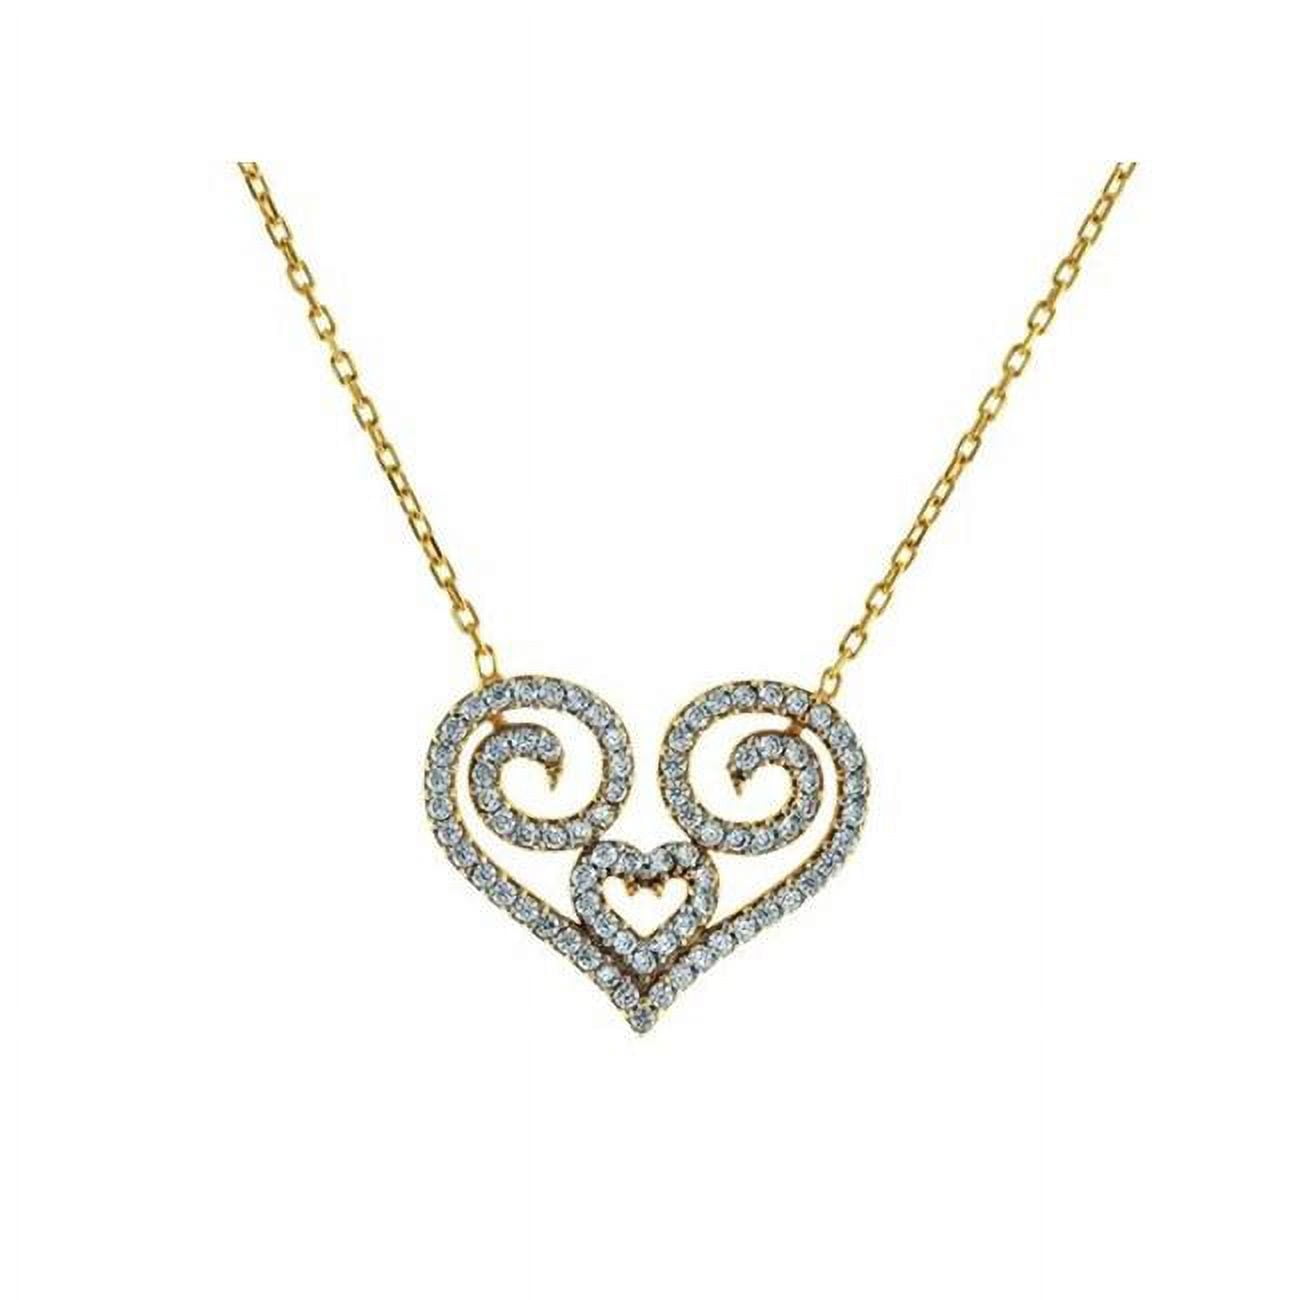 16 In. Silver Gold Plated Cubic Zirconia Greca Heart Shape Necklace